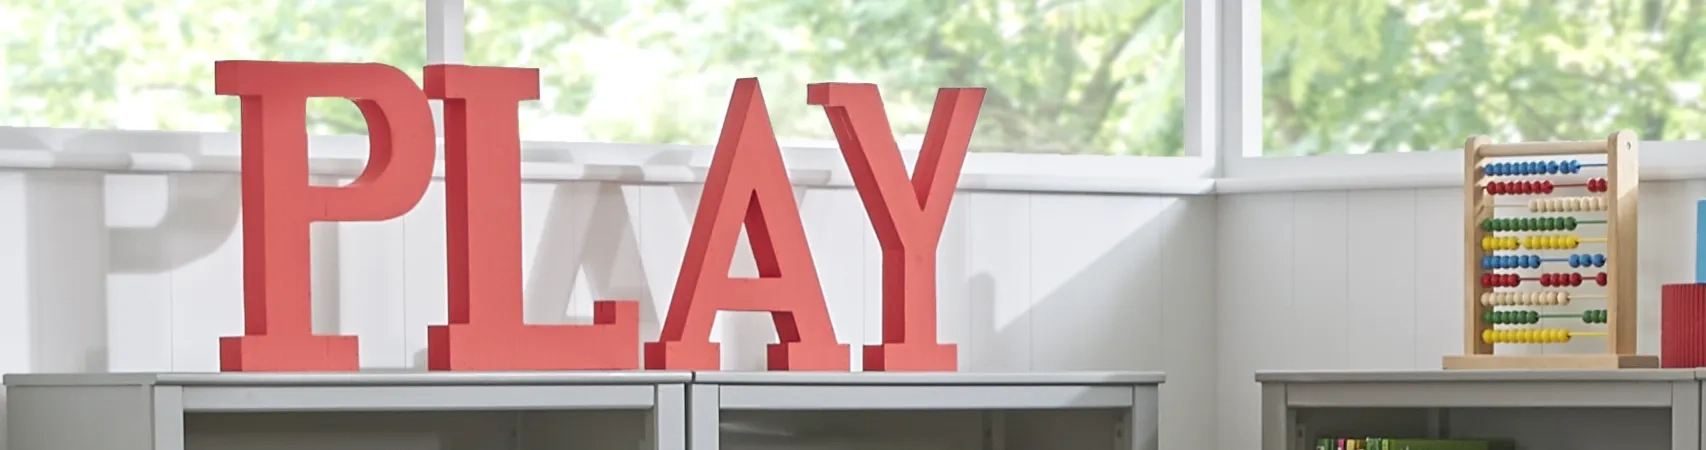 Room sign that reads "PLAY" placed in kids' playroom